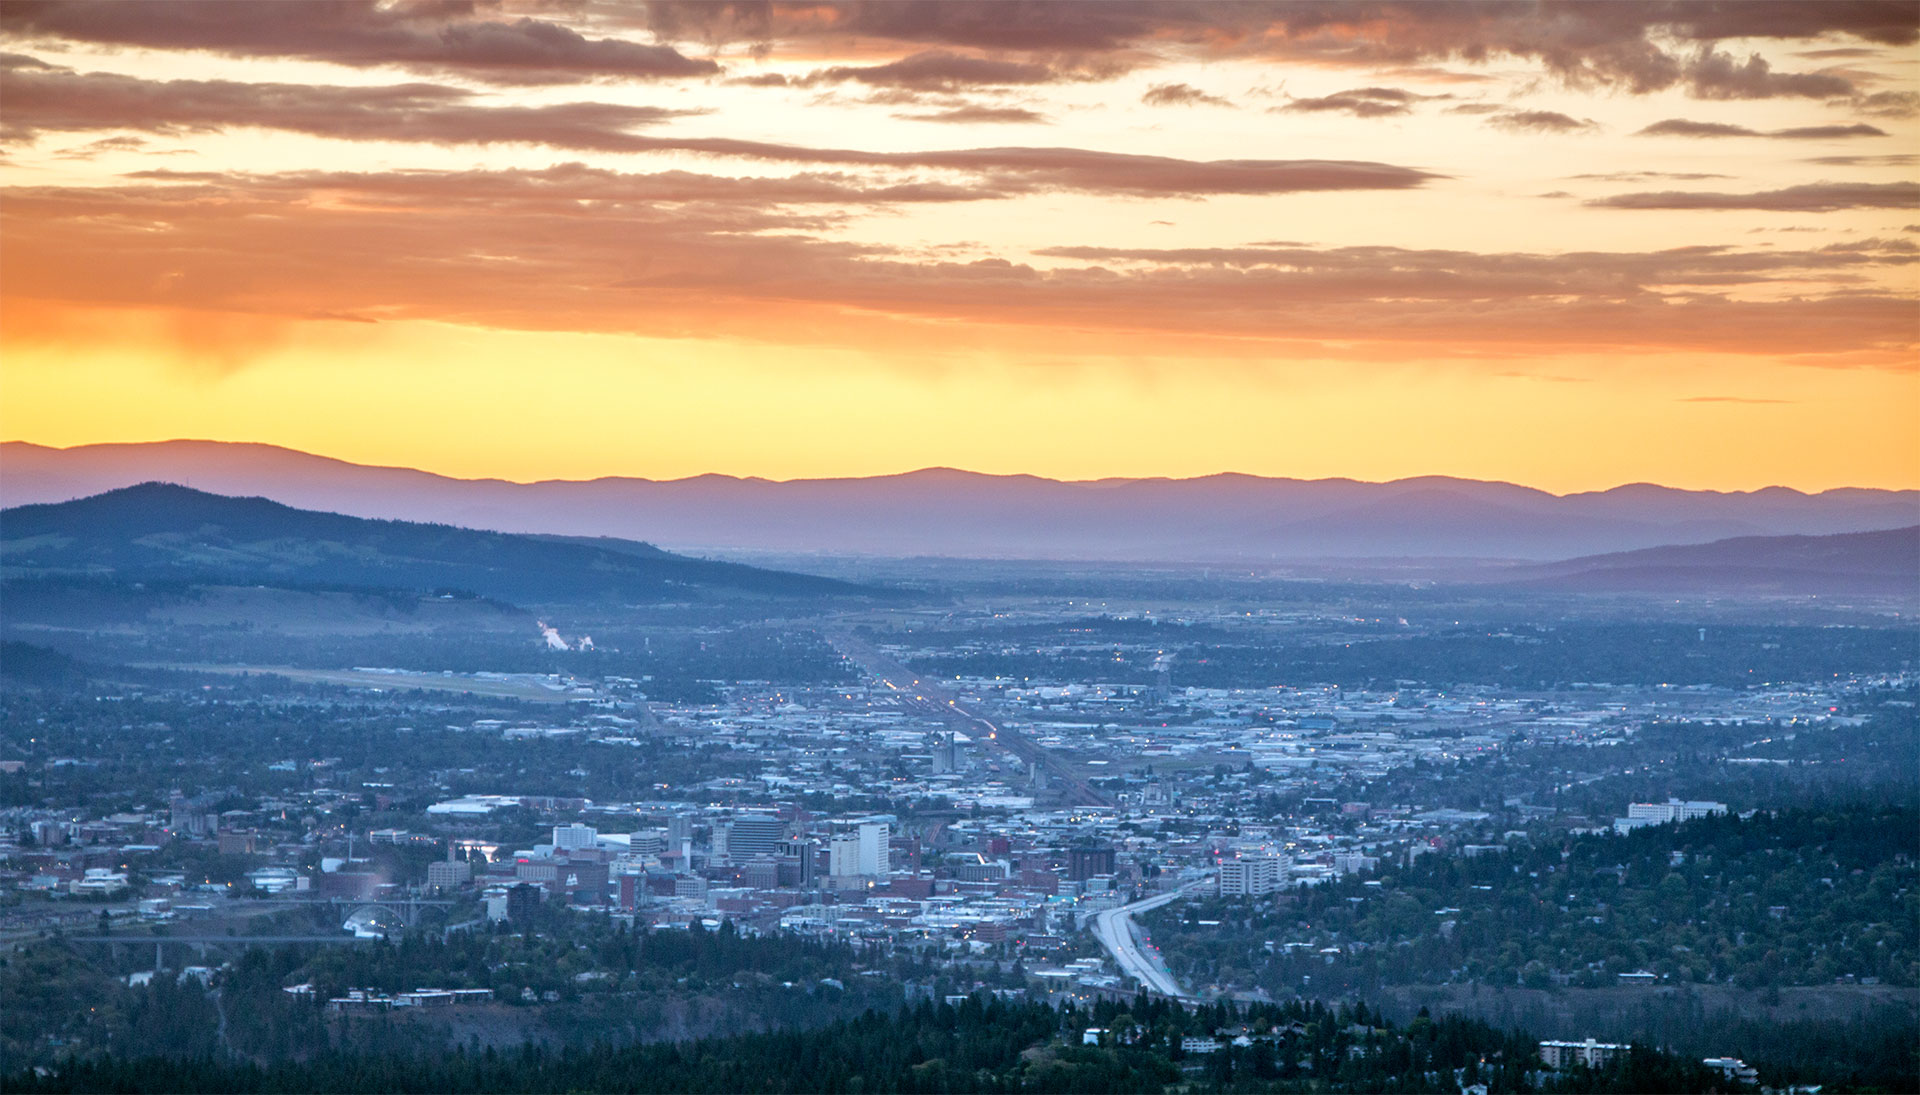 Sunrise looking East over Downtown Spokane from a Helicopter